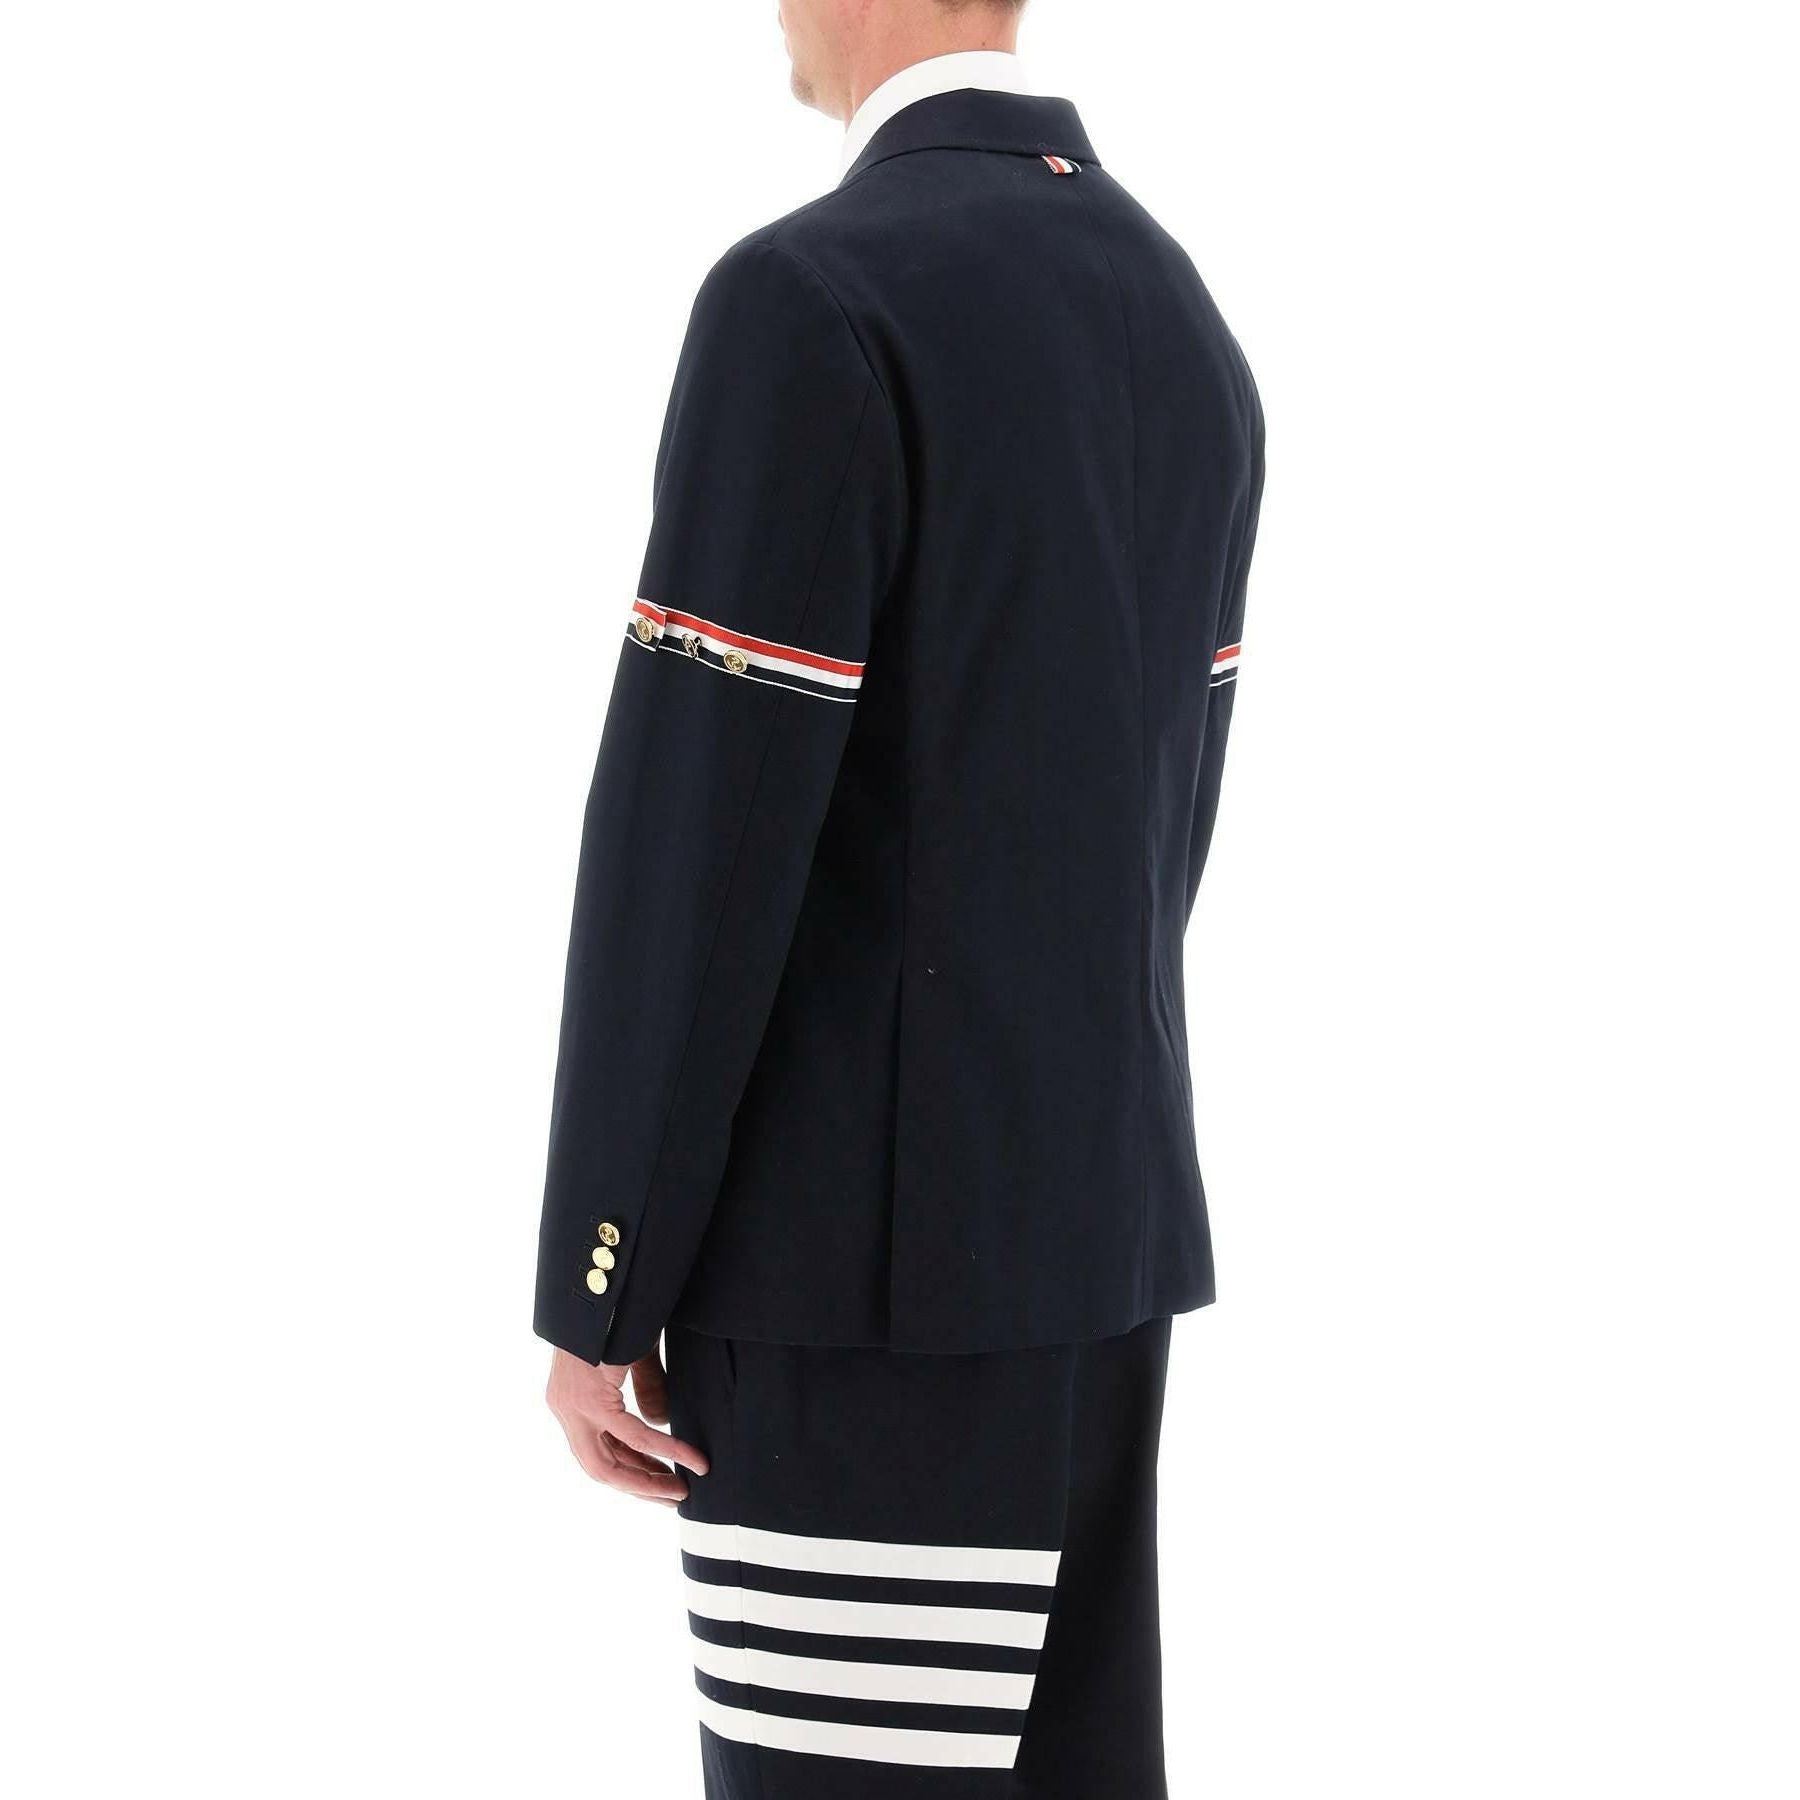 Deconstructed Jacket With Tricolor Bands THOM BROWNE JOHN JULIA.